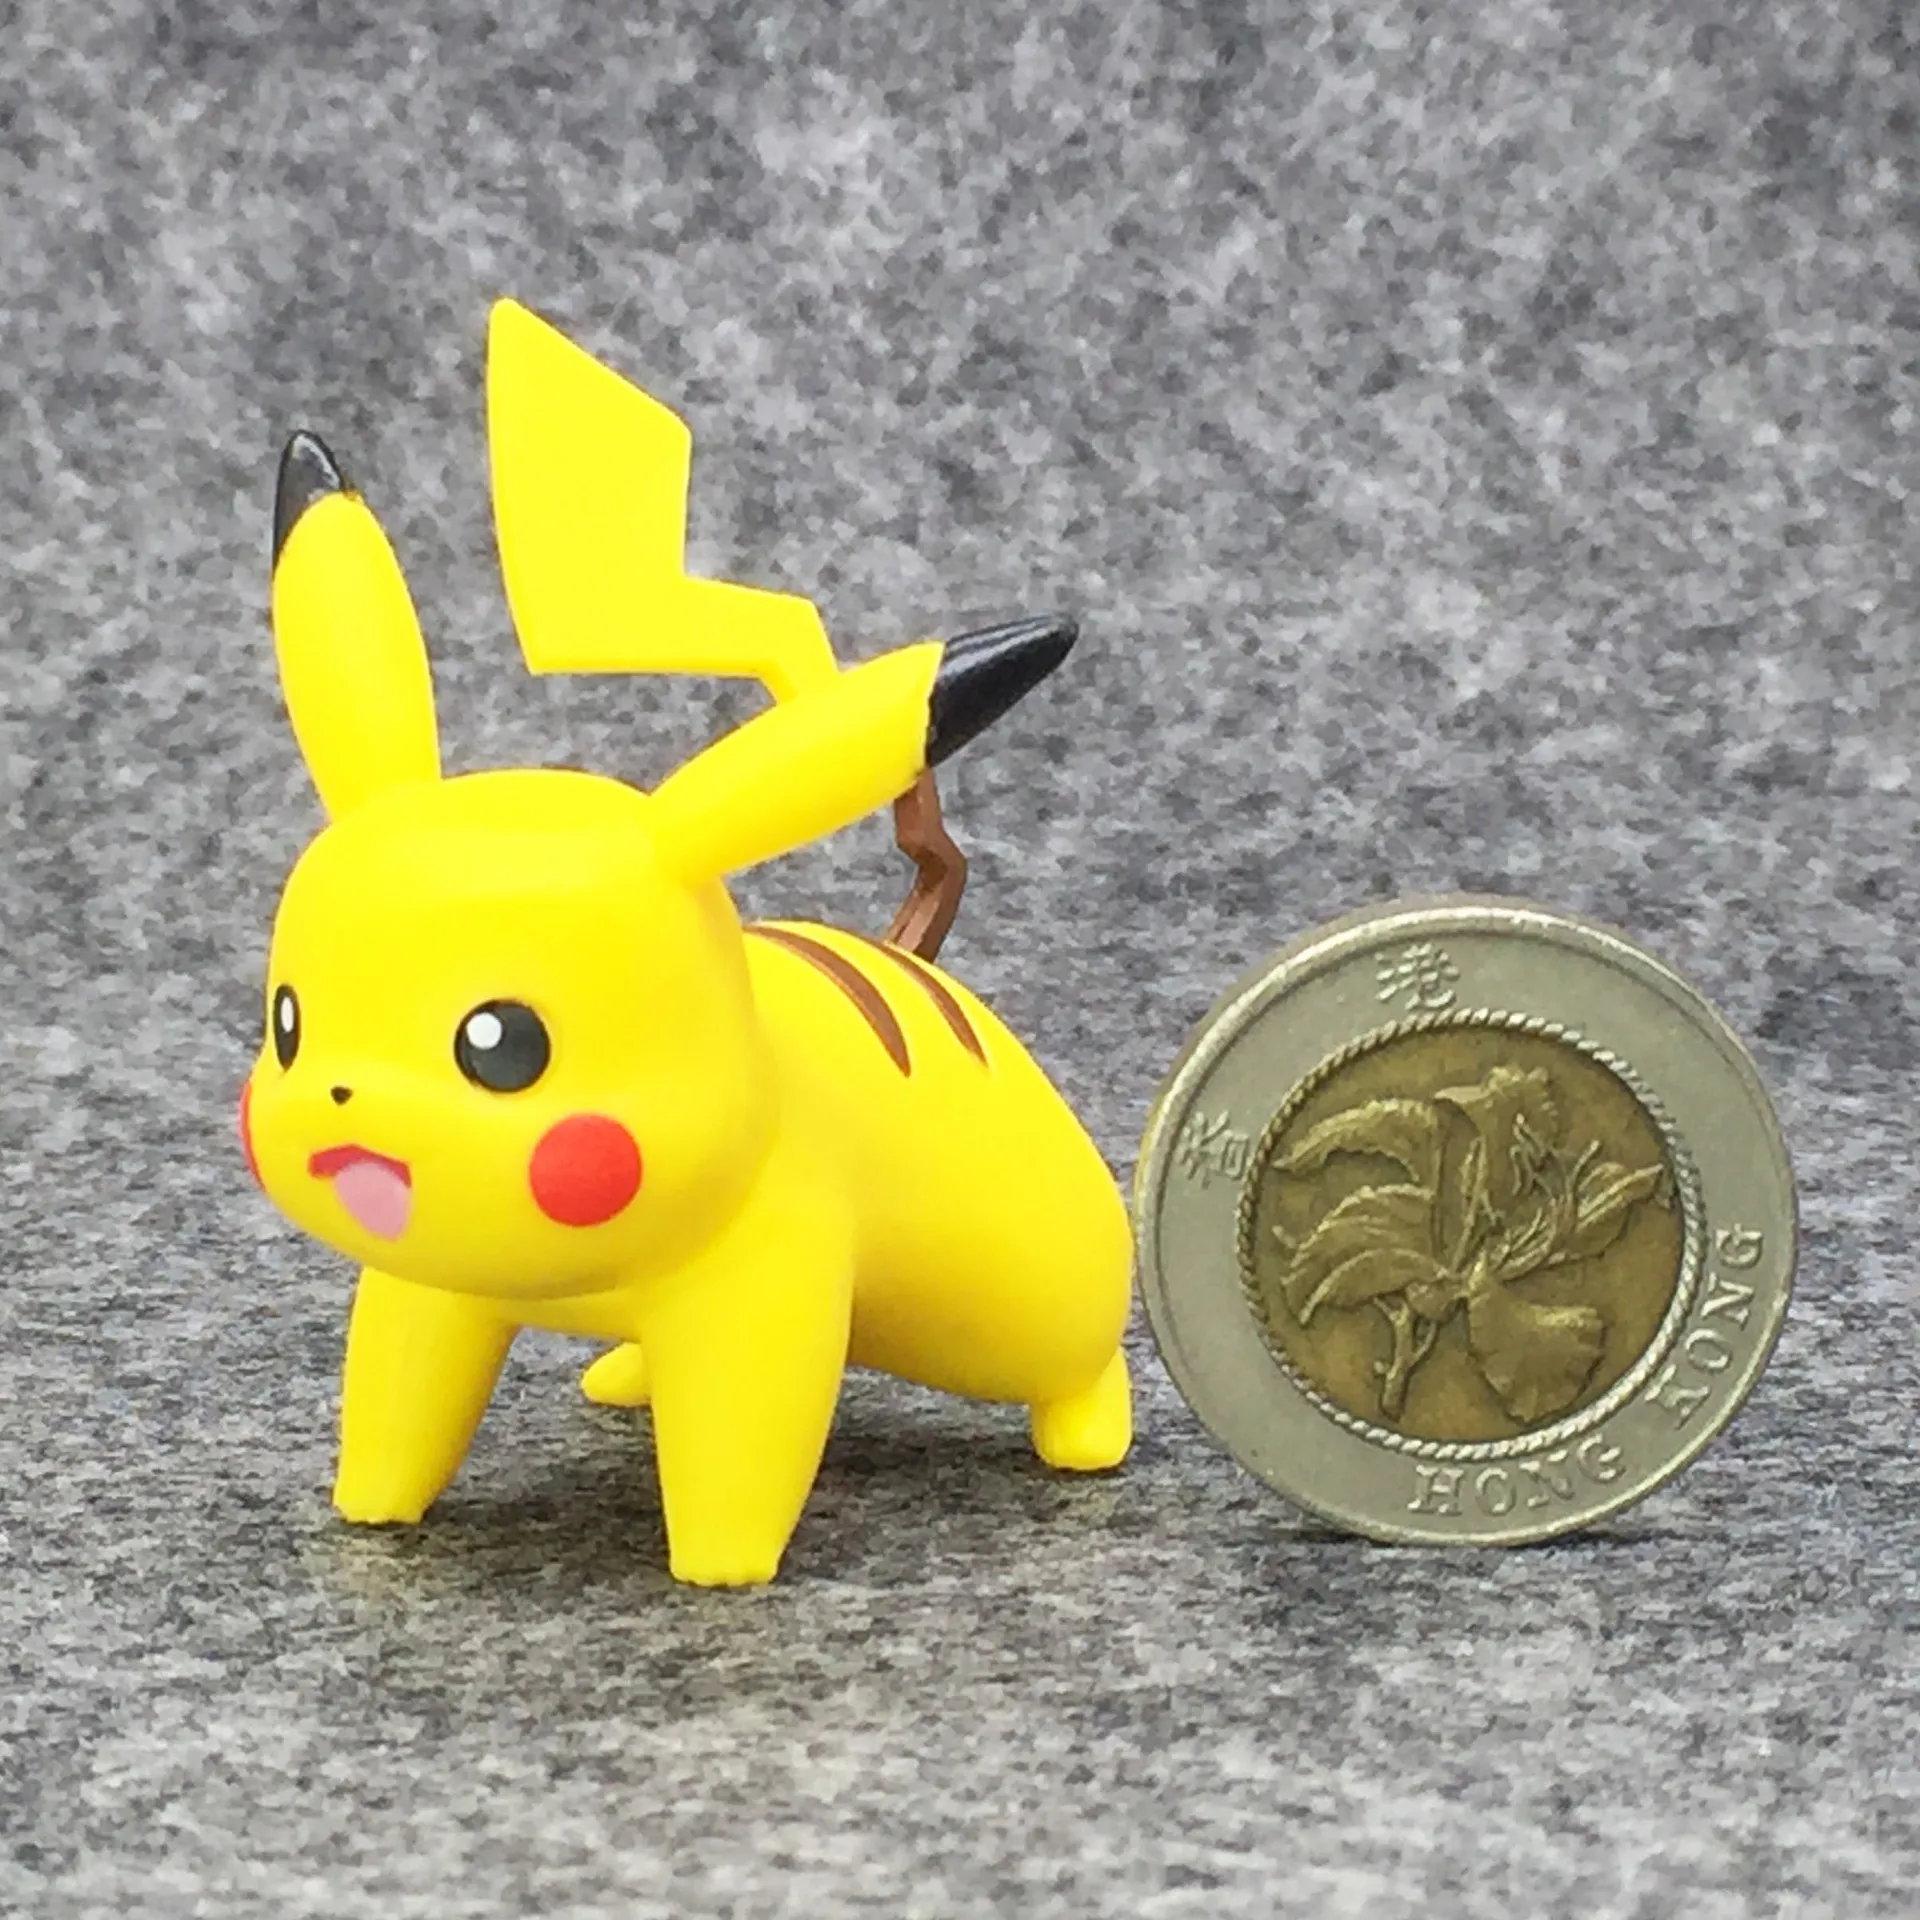 Takara Tomy Pokemon Detective pikachu Psyduck Mewtwo Bulbasaur Squirtle Eevee anime action& toy figures model - Цвет: 13